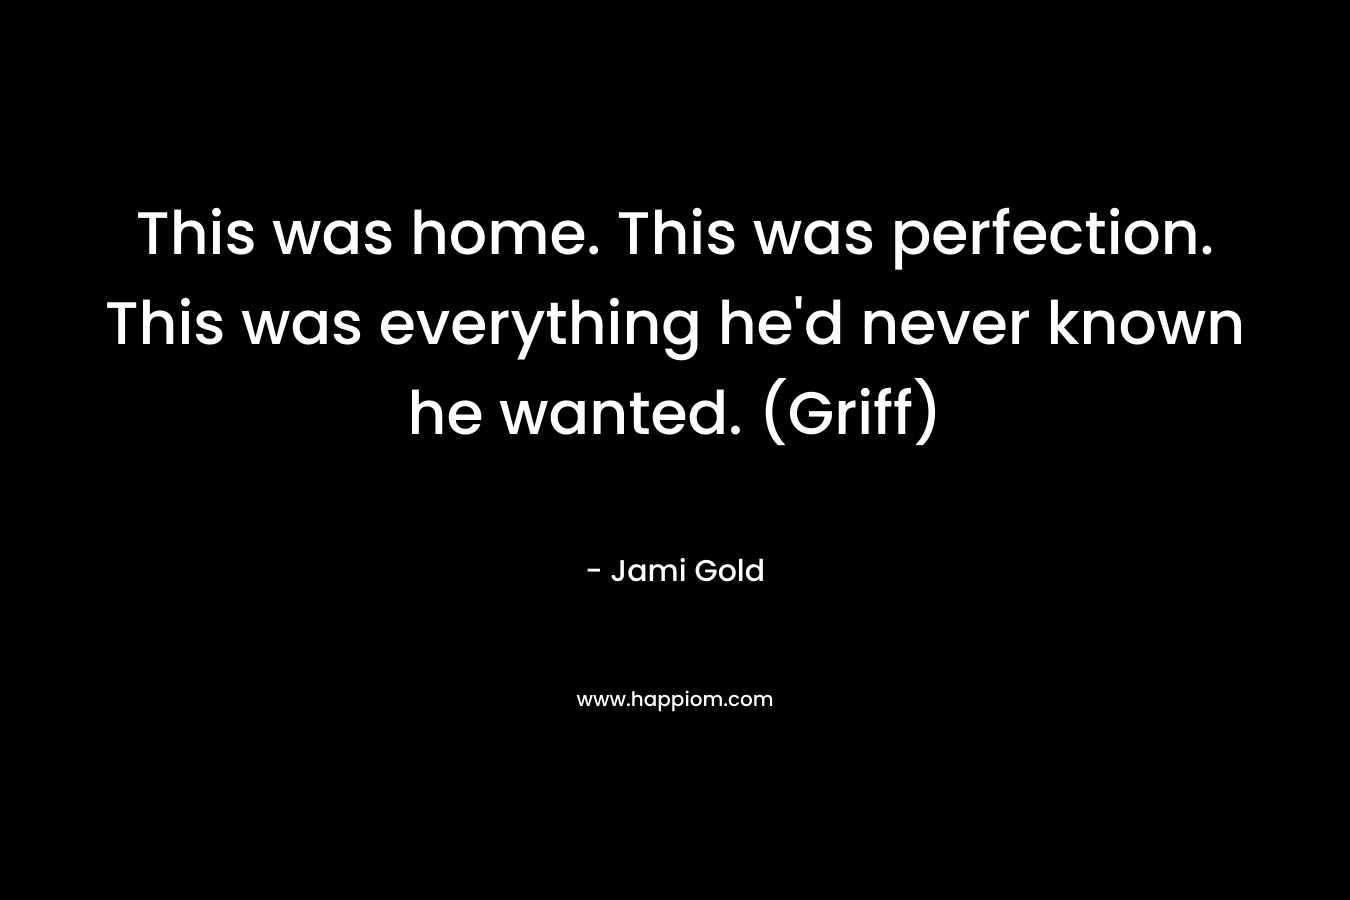 This was home. This was perfection. This was everything he'd never known he wanted. (Griff)